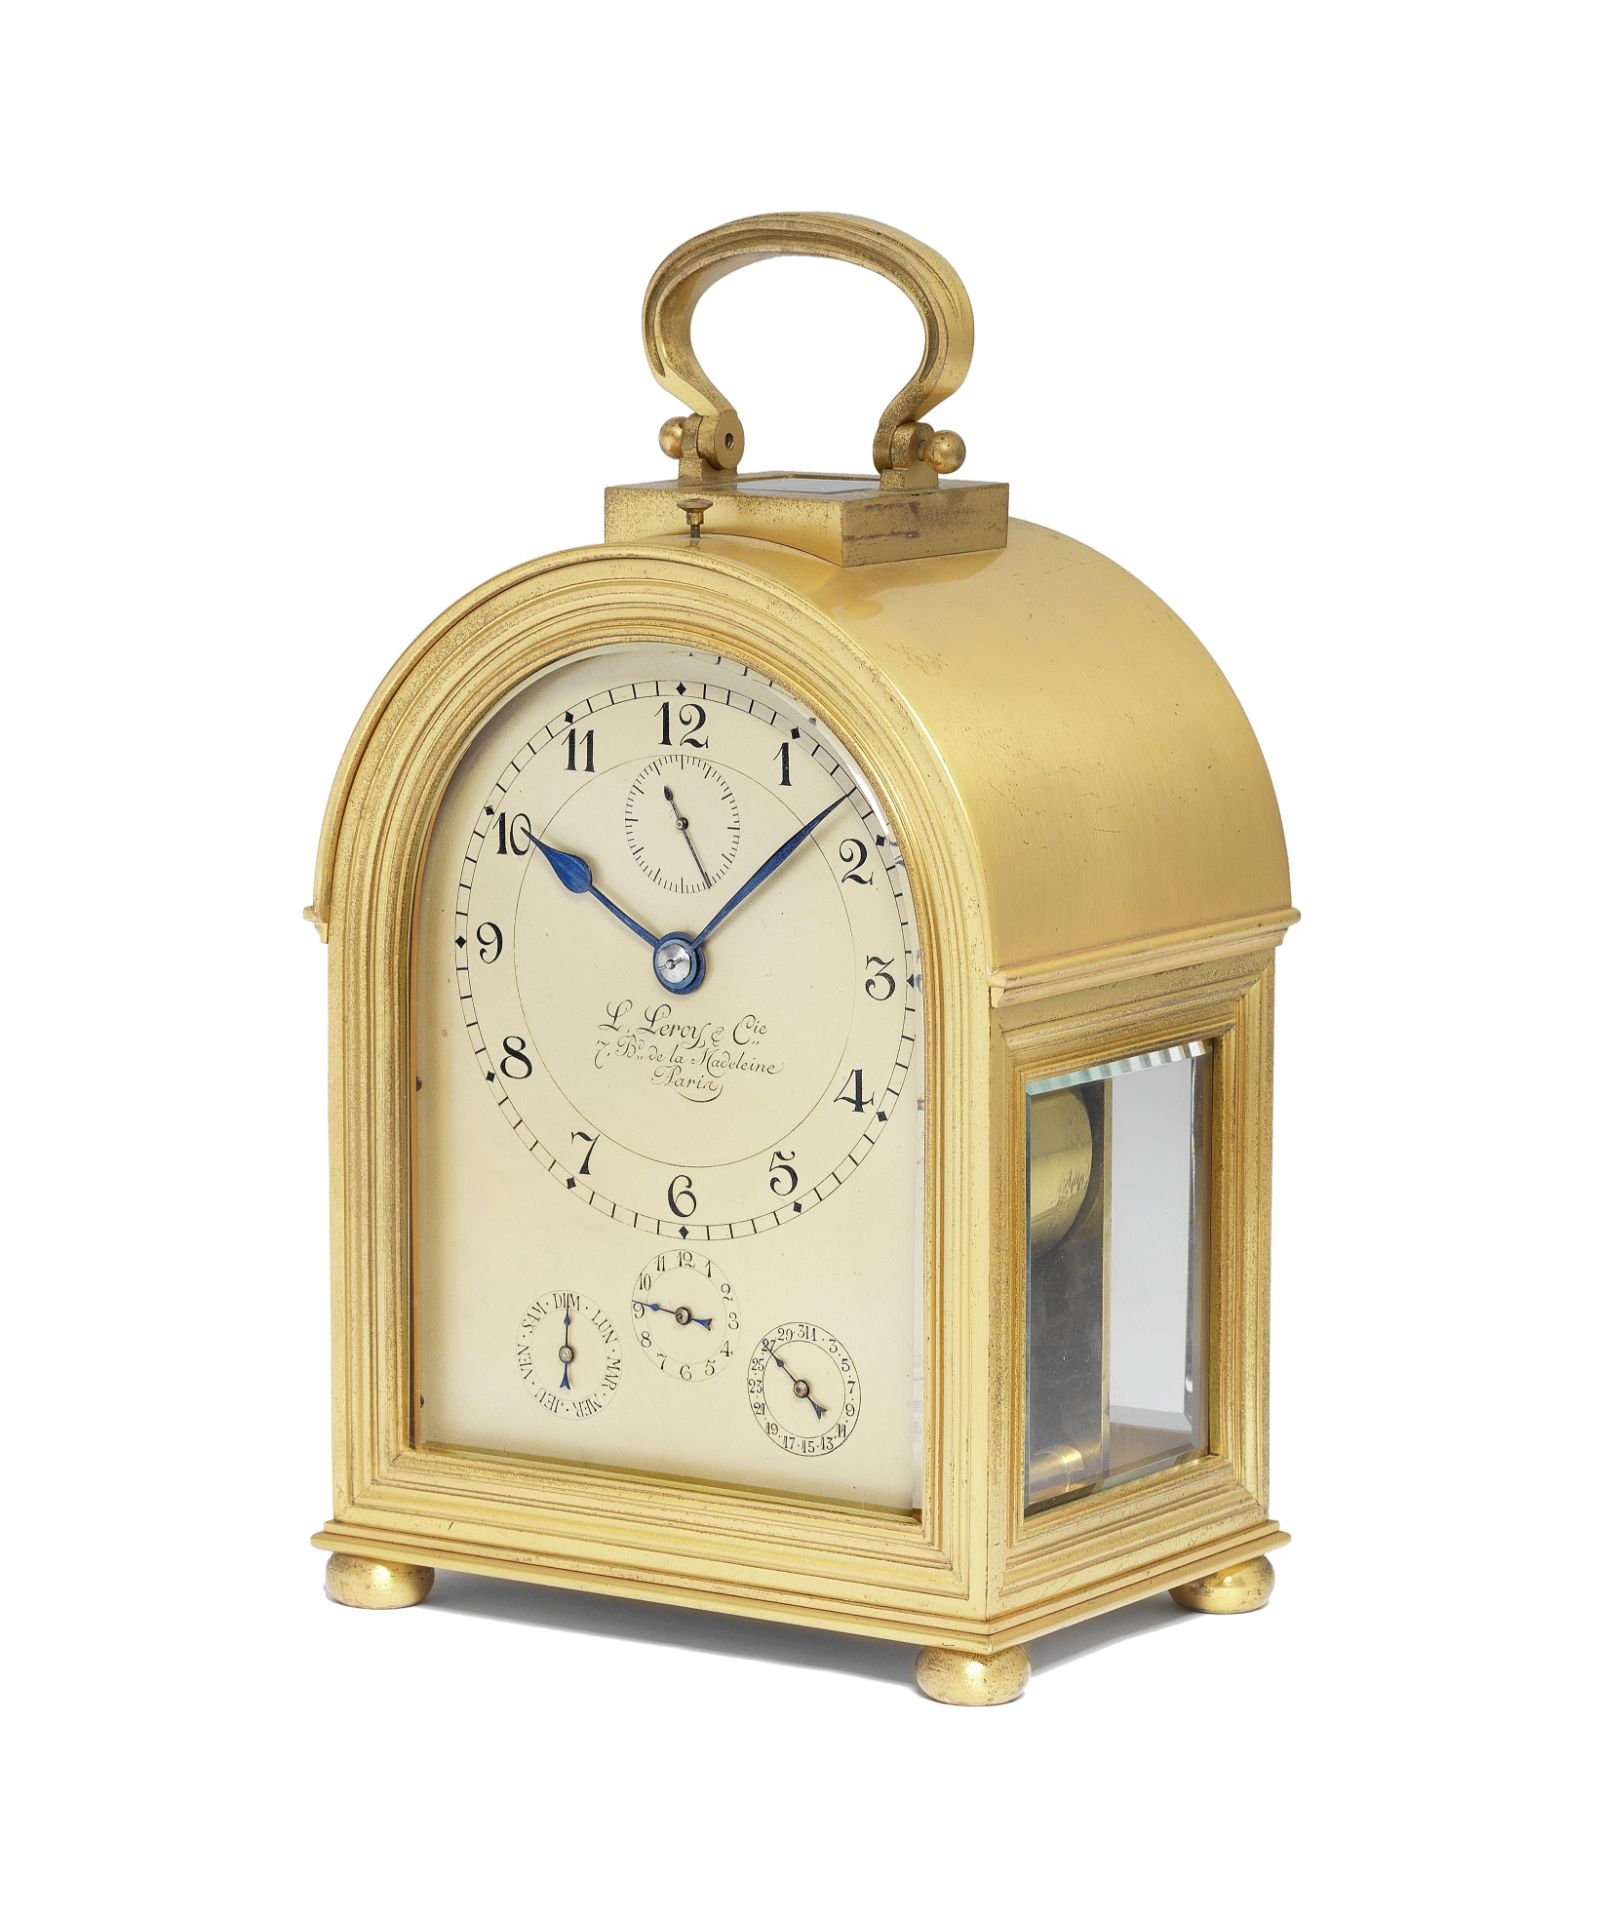 A fine early 20th century French bourne-shaped grande sonnerie carriage clock with running second...